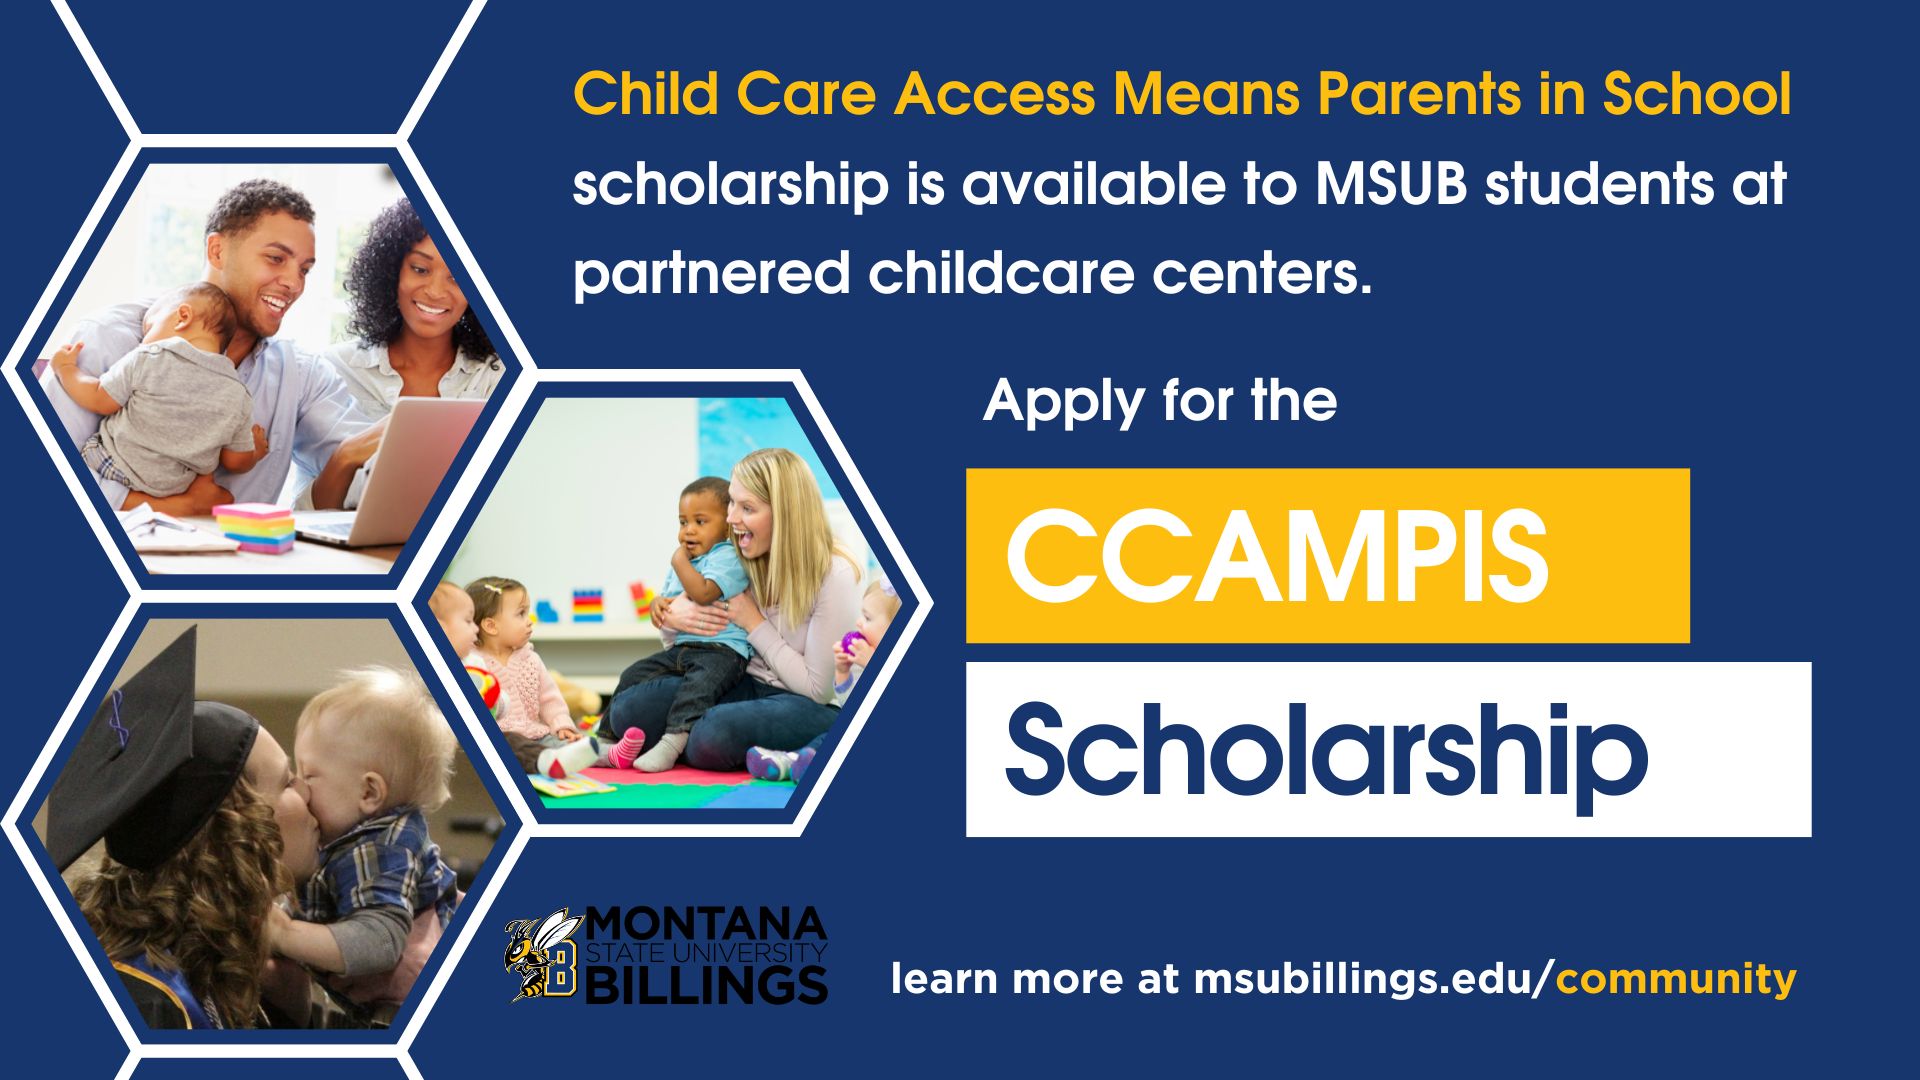 The Child Care Access Means Parents in School (CCAMPIS) scholarship is available to MSU Billings students at partnered childcare centers. Apply for the CCAMPIS scholarship.